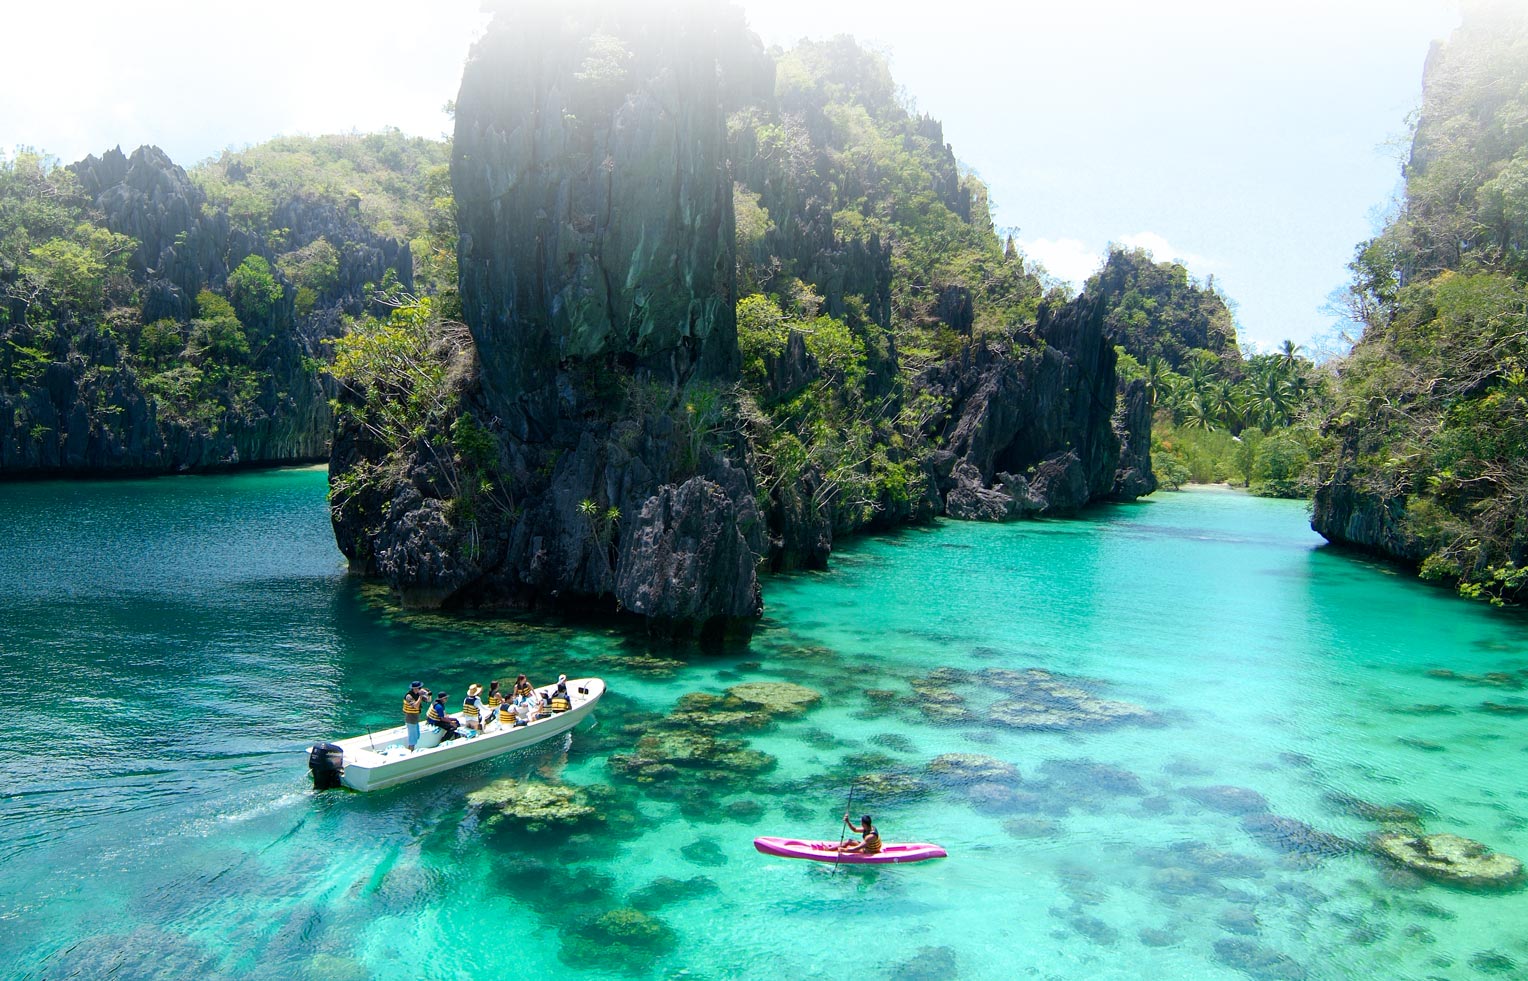 Where To Go in The Philippines Based On Your Personality